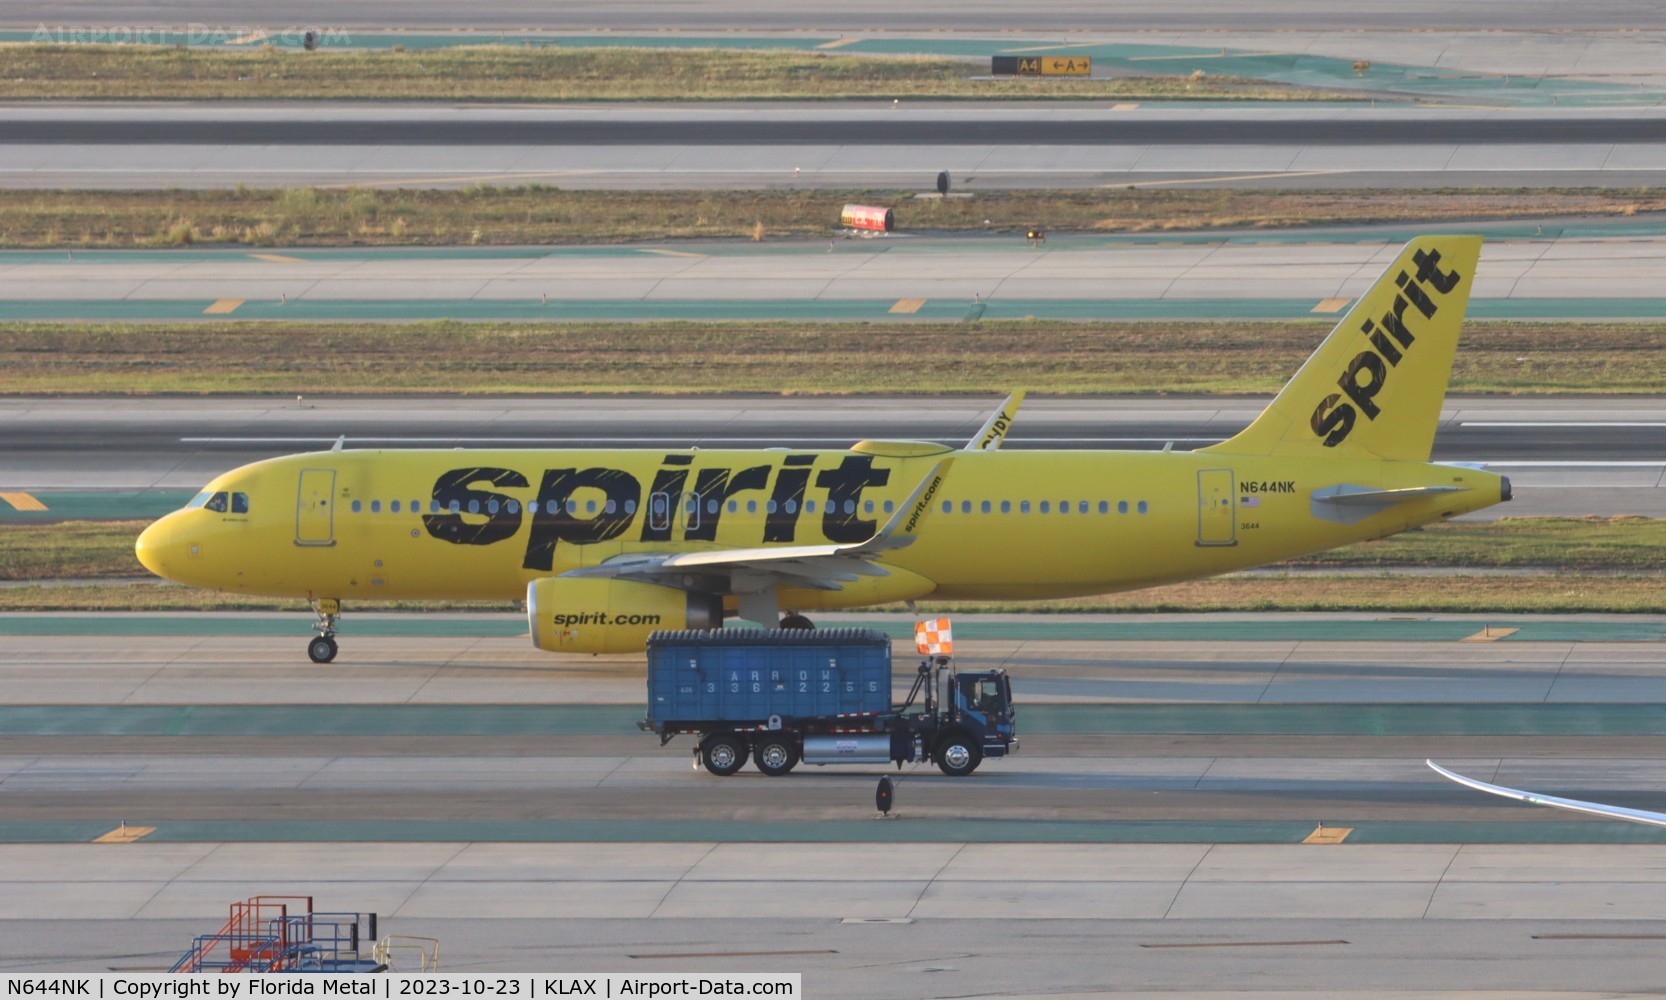 N644NK, 2016 Airbus A320-233 C/N 7156, NKS A320 yellow zx LAX-BWI